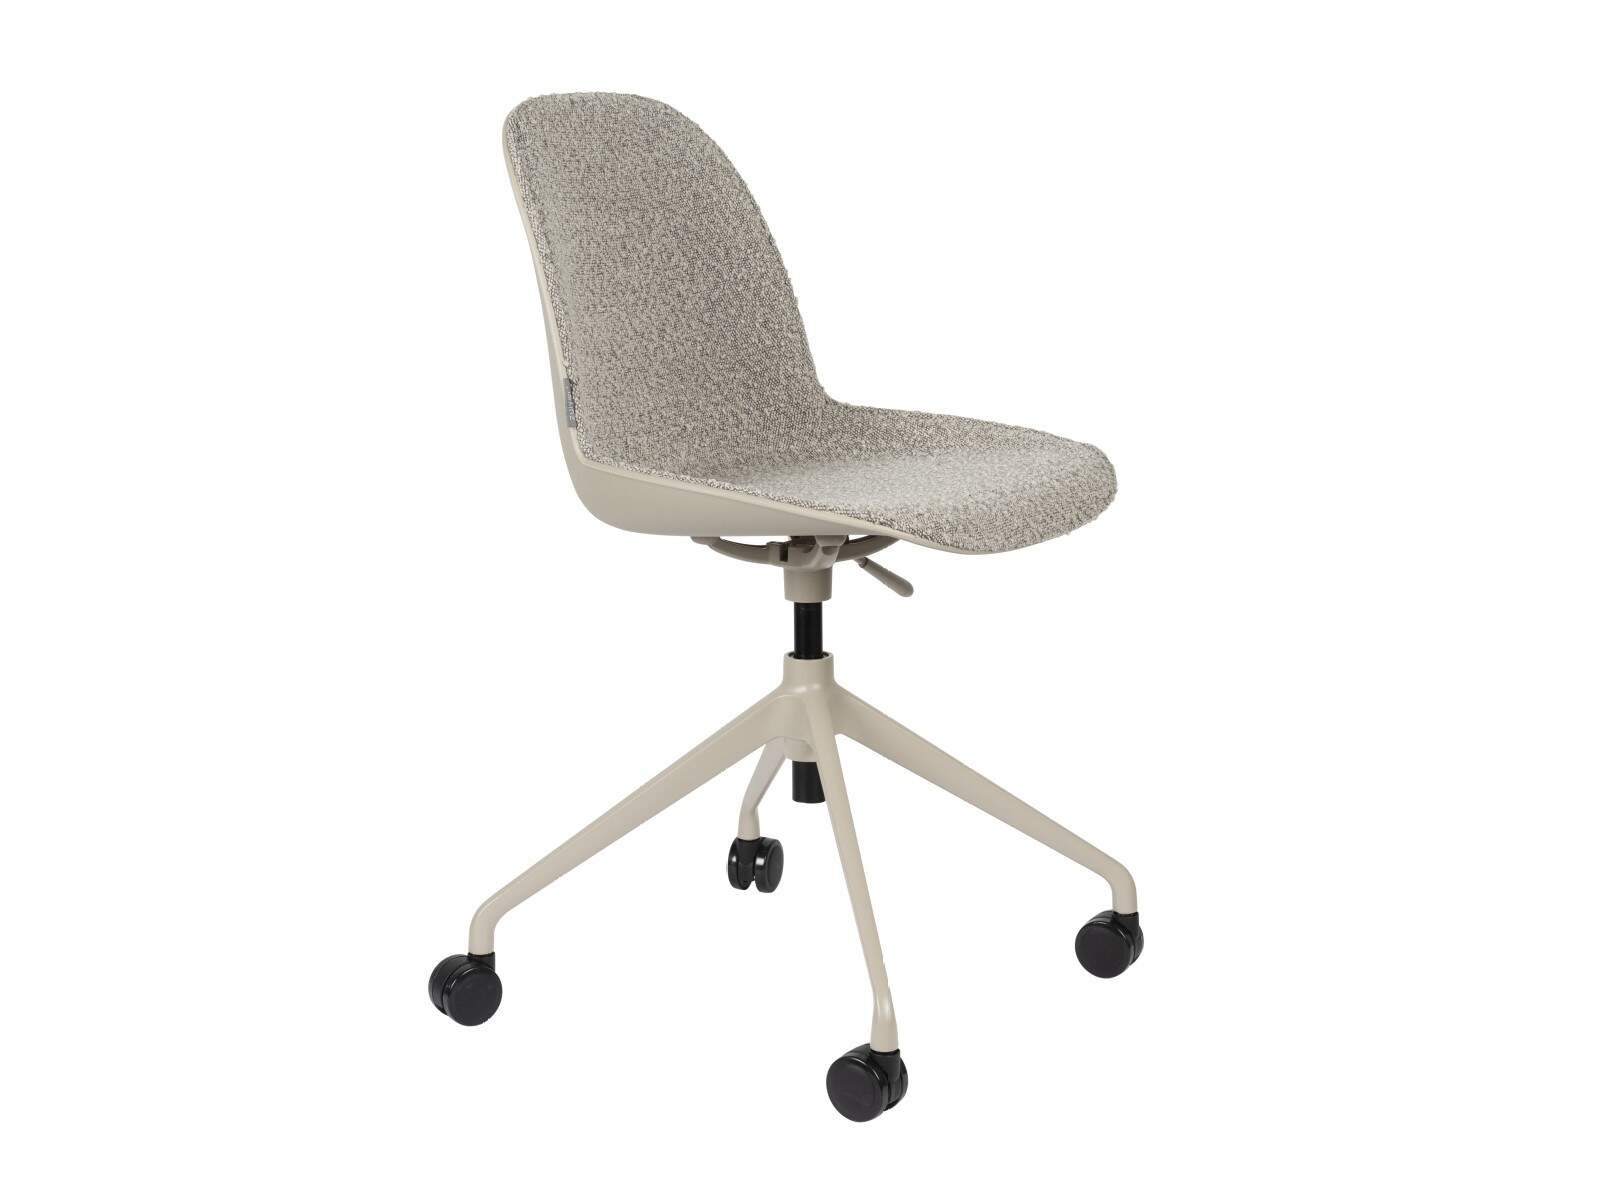 Zuiver Albert Kuip Office chair taupe // Zuiver Albert Kuip Office irodai szék taupe